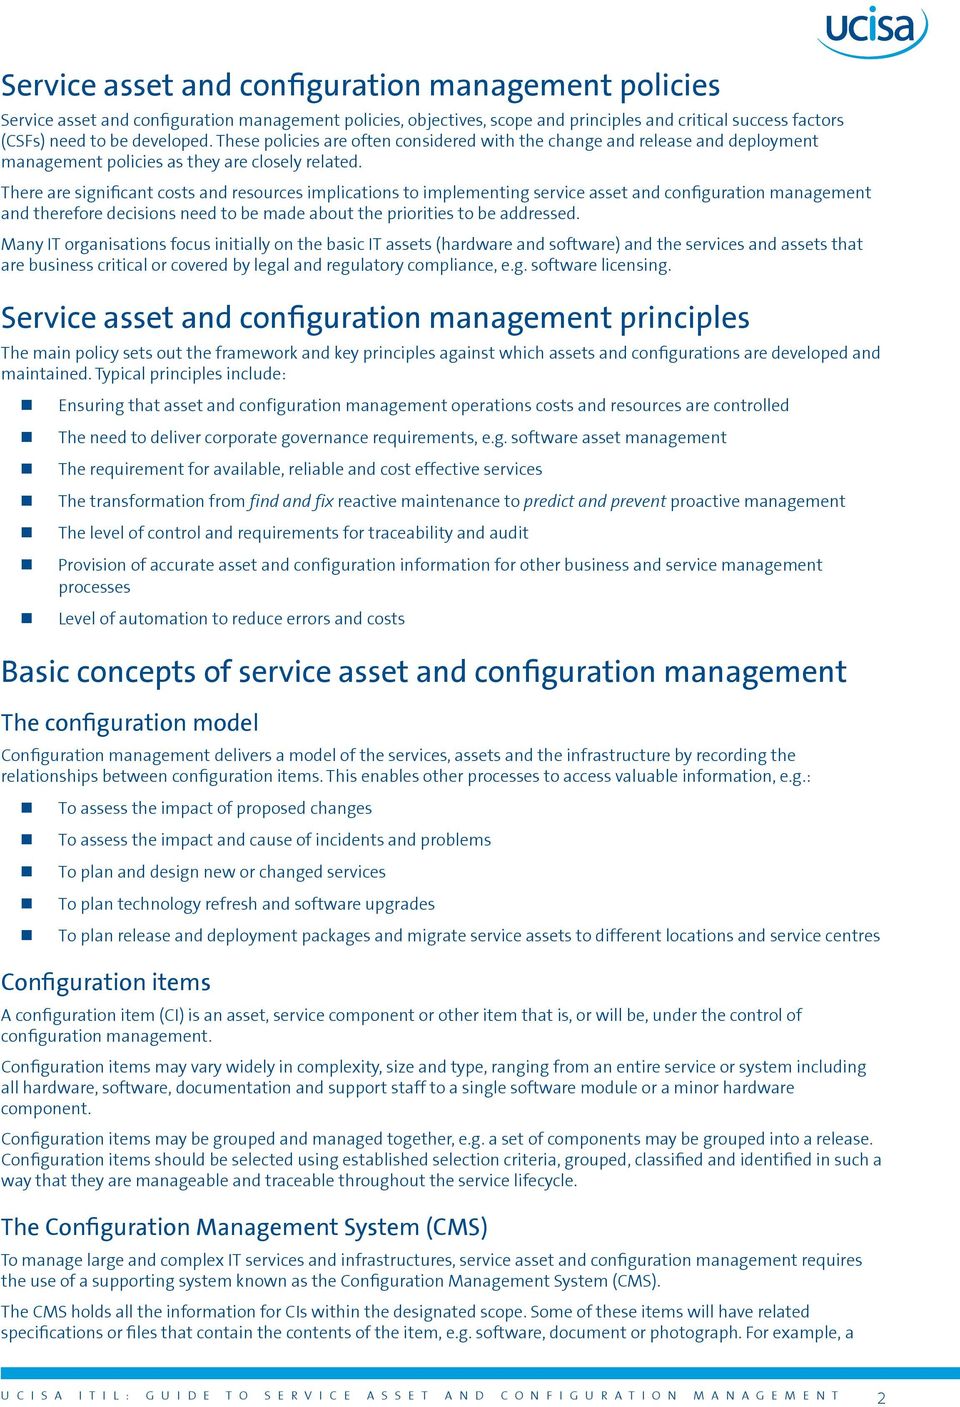 There are significant costs and resources implications to implementing service asset and configuration management and therefore decisions need to be made about the priorities to be addressed.